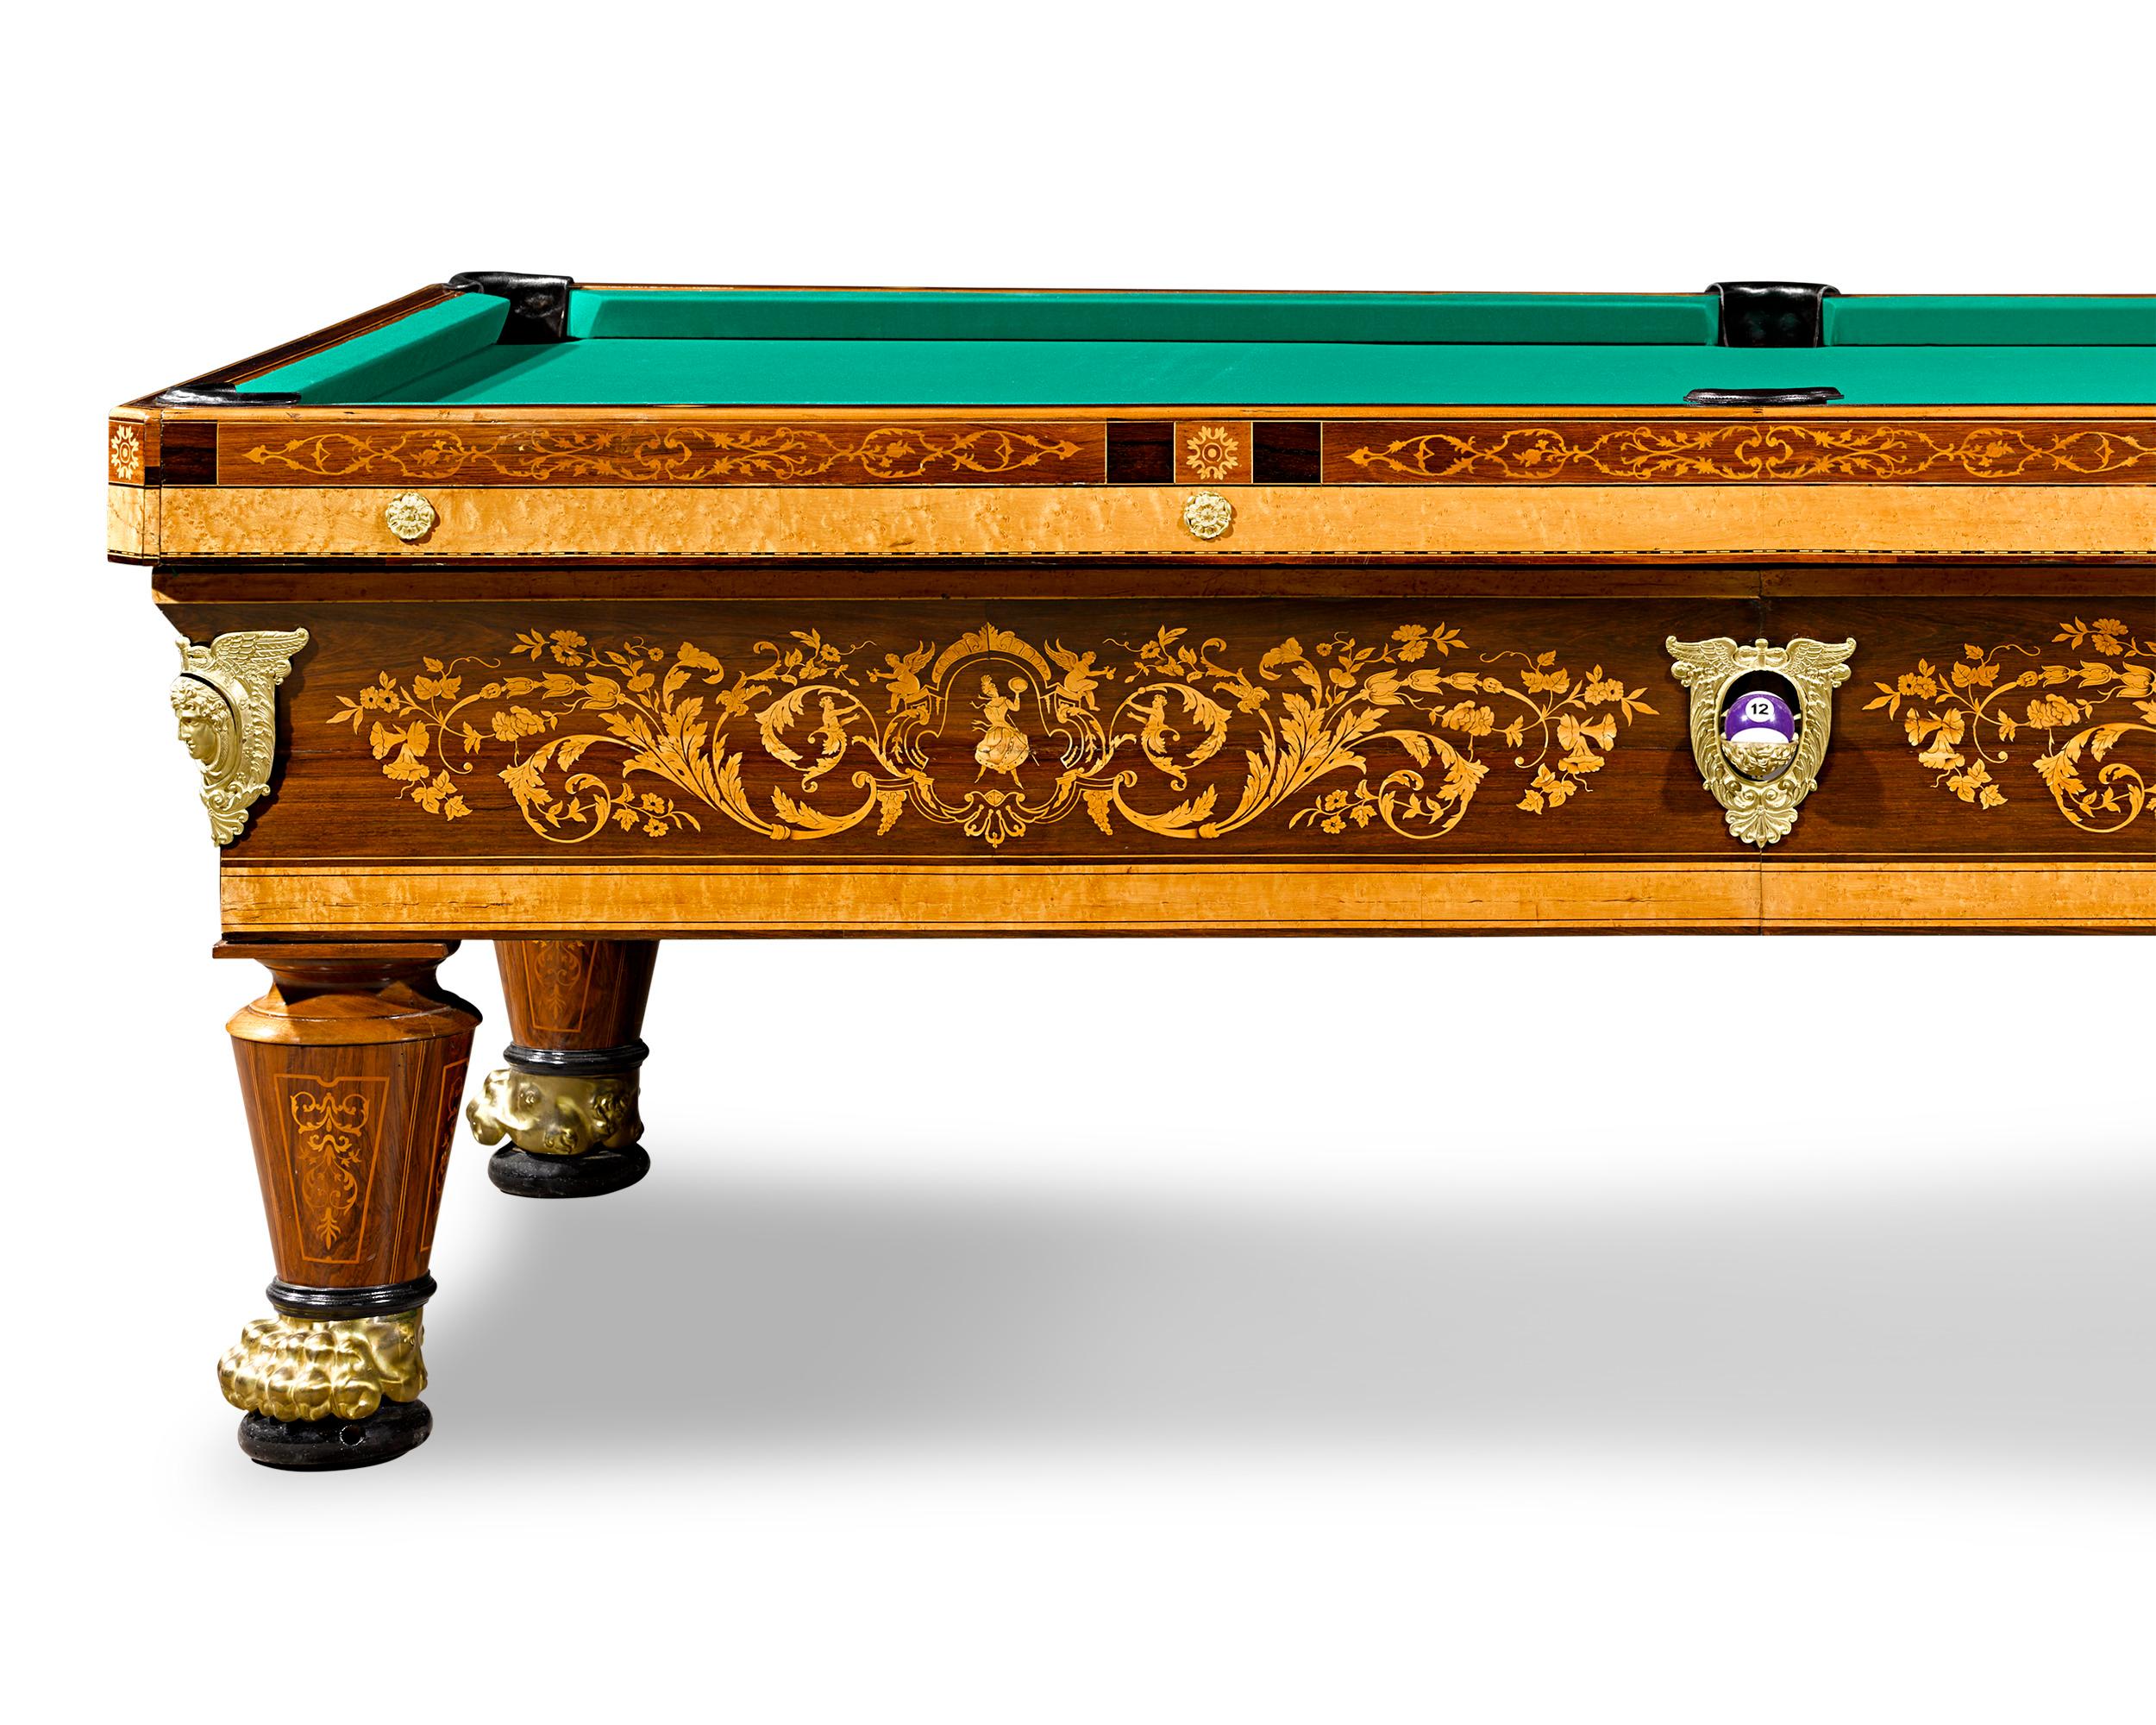 Beautifully constructed, this French billiard table was almost certainly made for an aristocratic country house of the 19th century, an age when billiards was a favored pastime of the European elite. Its neoclassical design features intricate wood